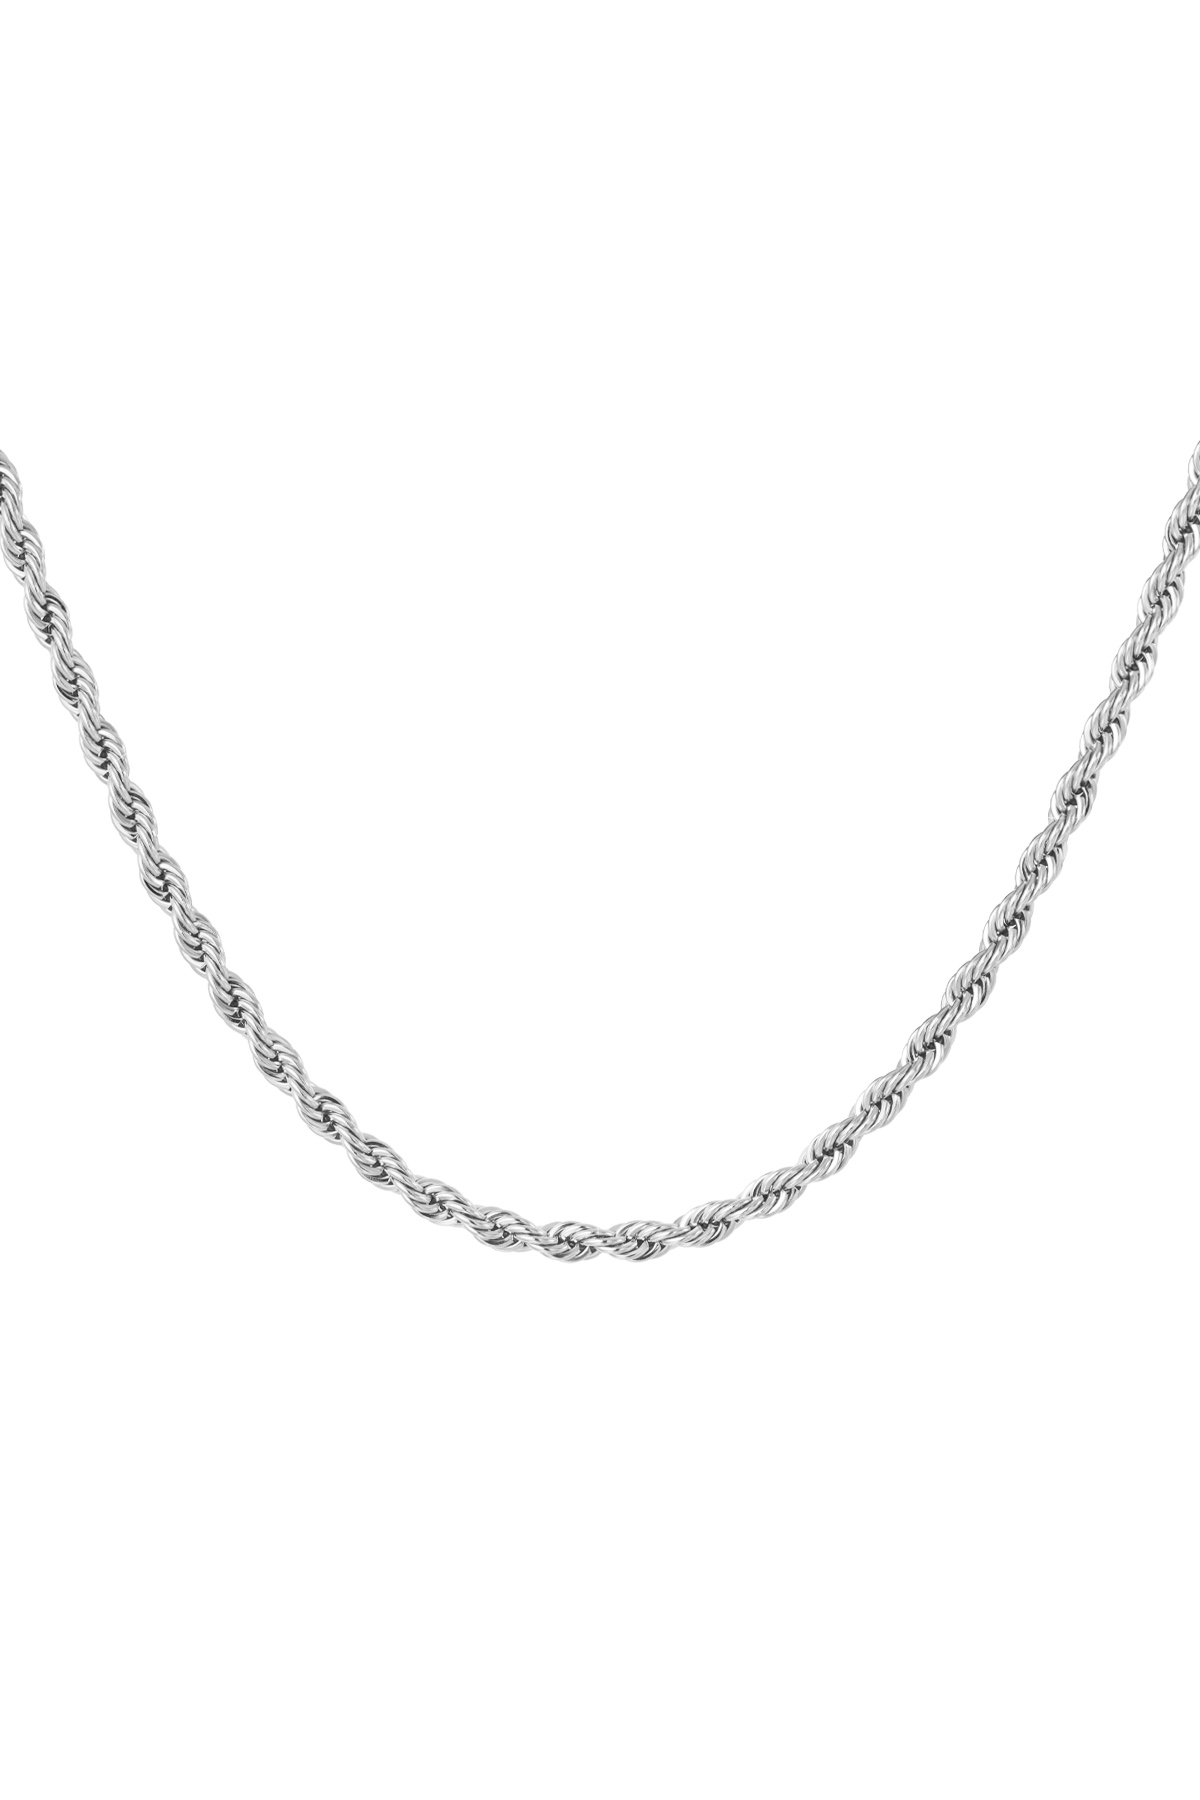 Unisex necklace twisted - silver - 4.5MM h5 